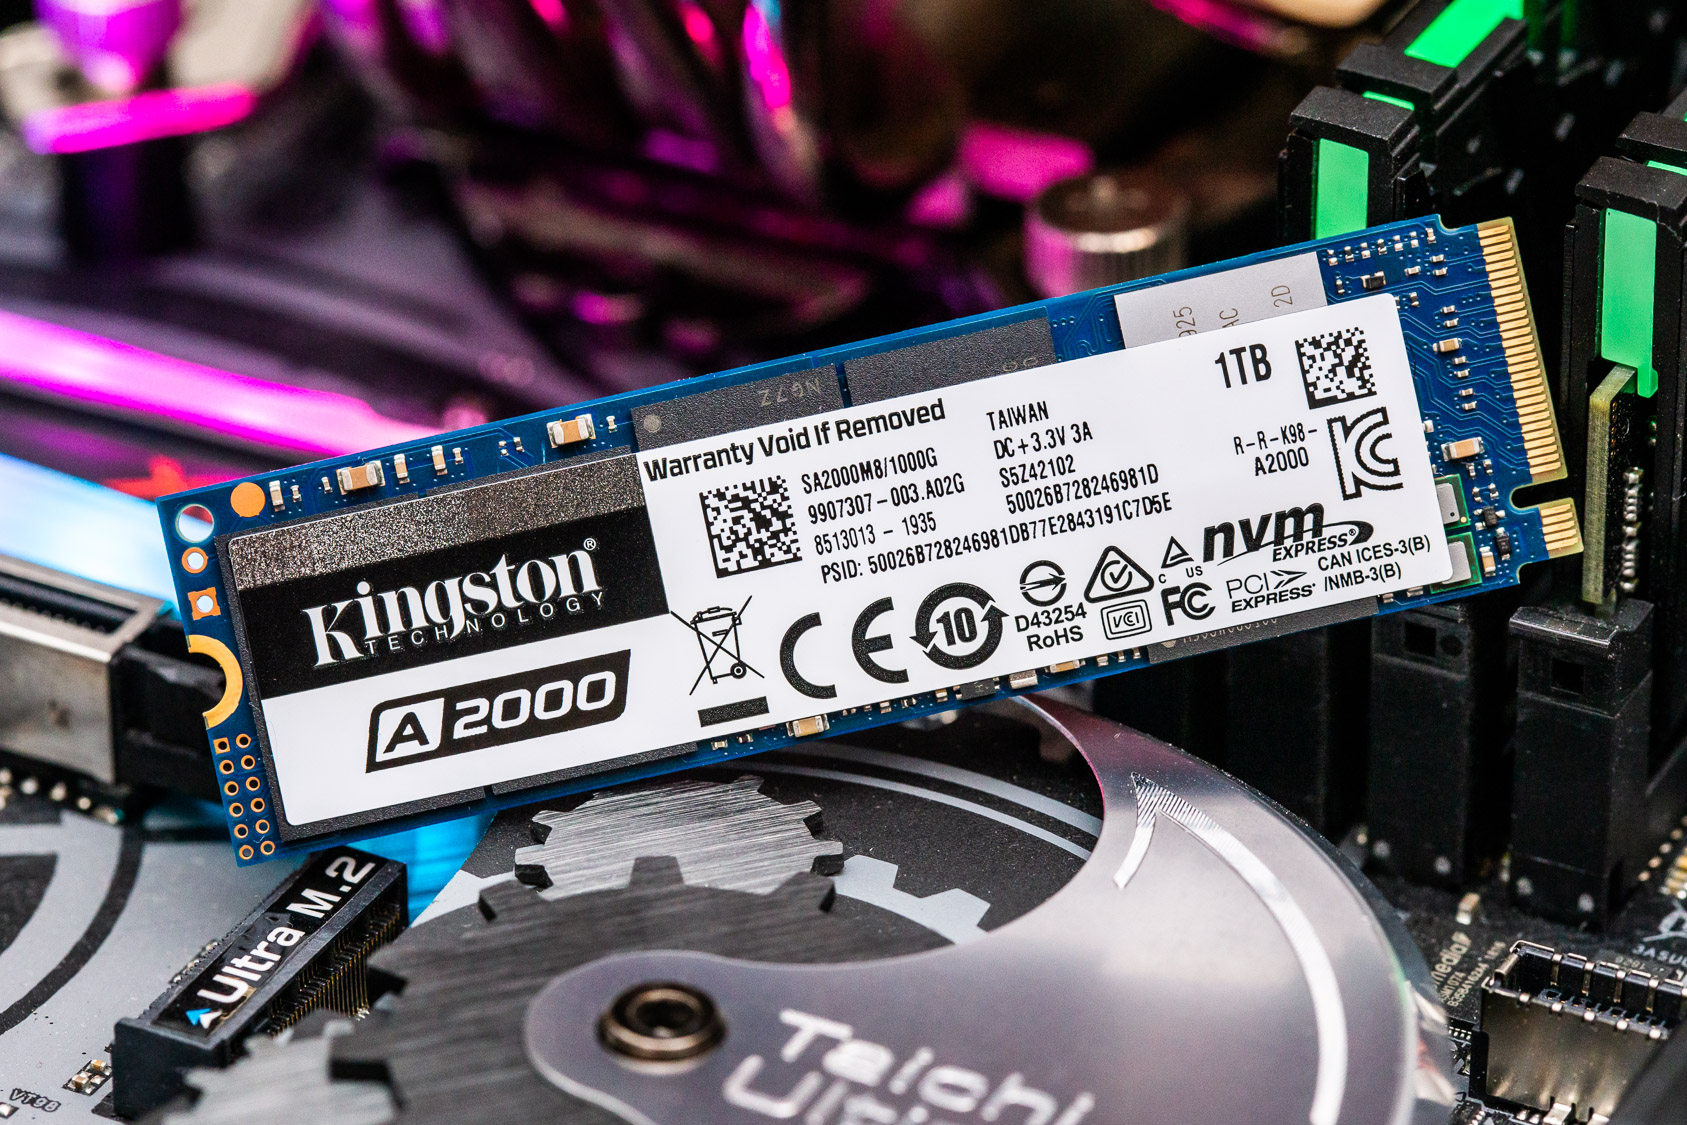 Performance Results - Kingston A2000 M.2 NVMe SSD Review: Security ...